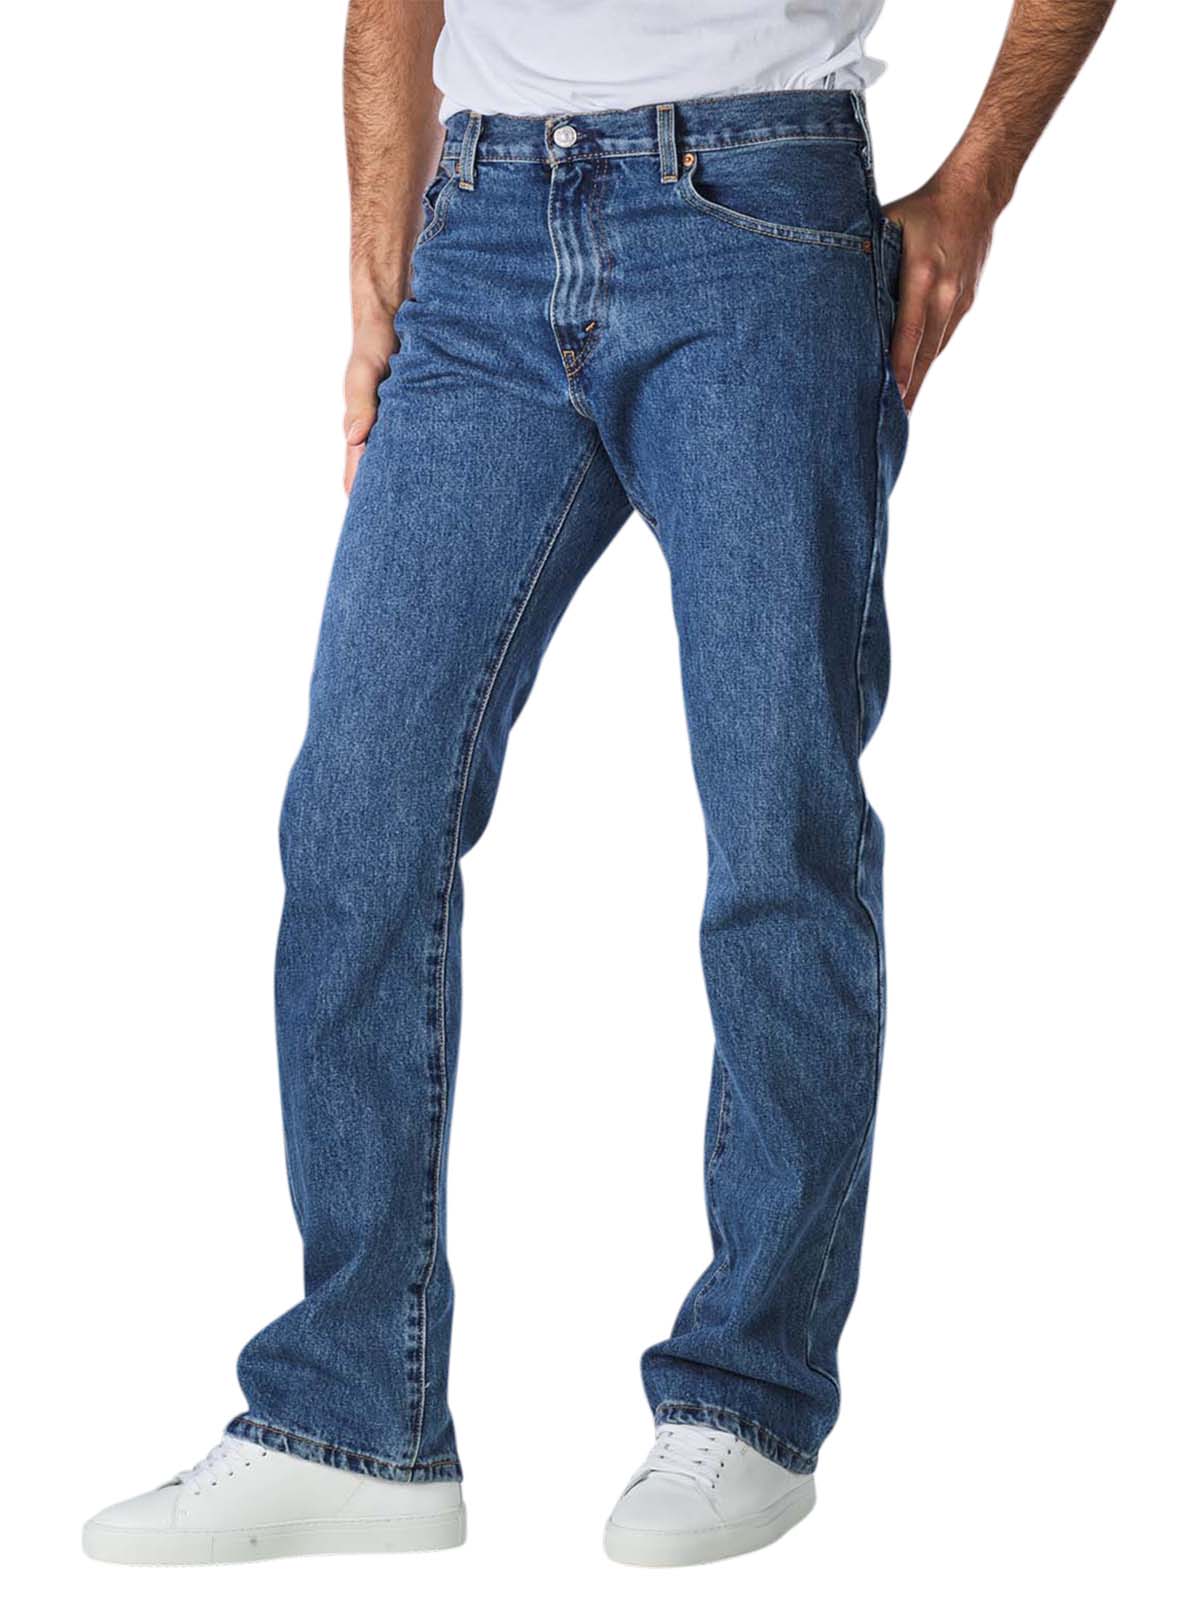 Levi's 517 Jeans Bootcut Fit med sw Levi's Men's Jeans | Free Shipping on   - SIMPLY LOOK GOOD